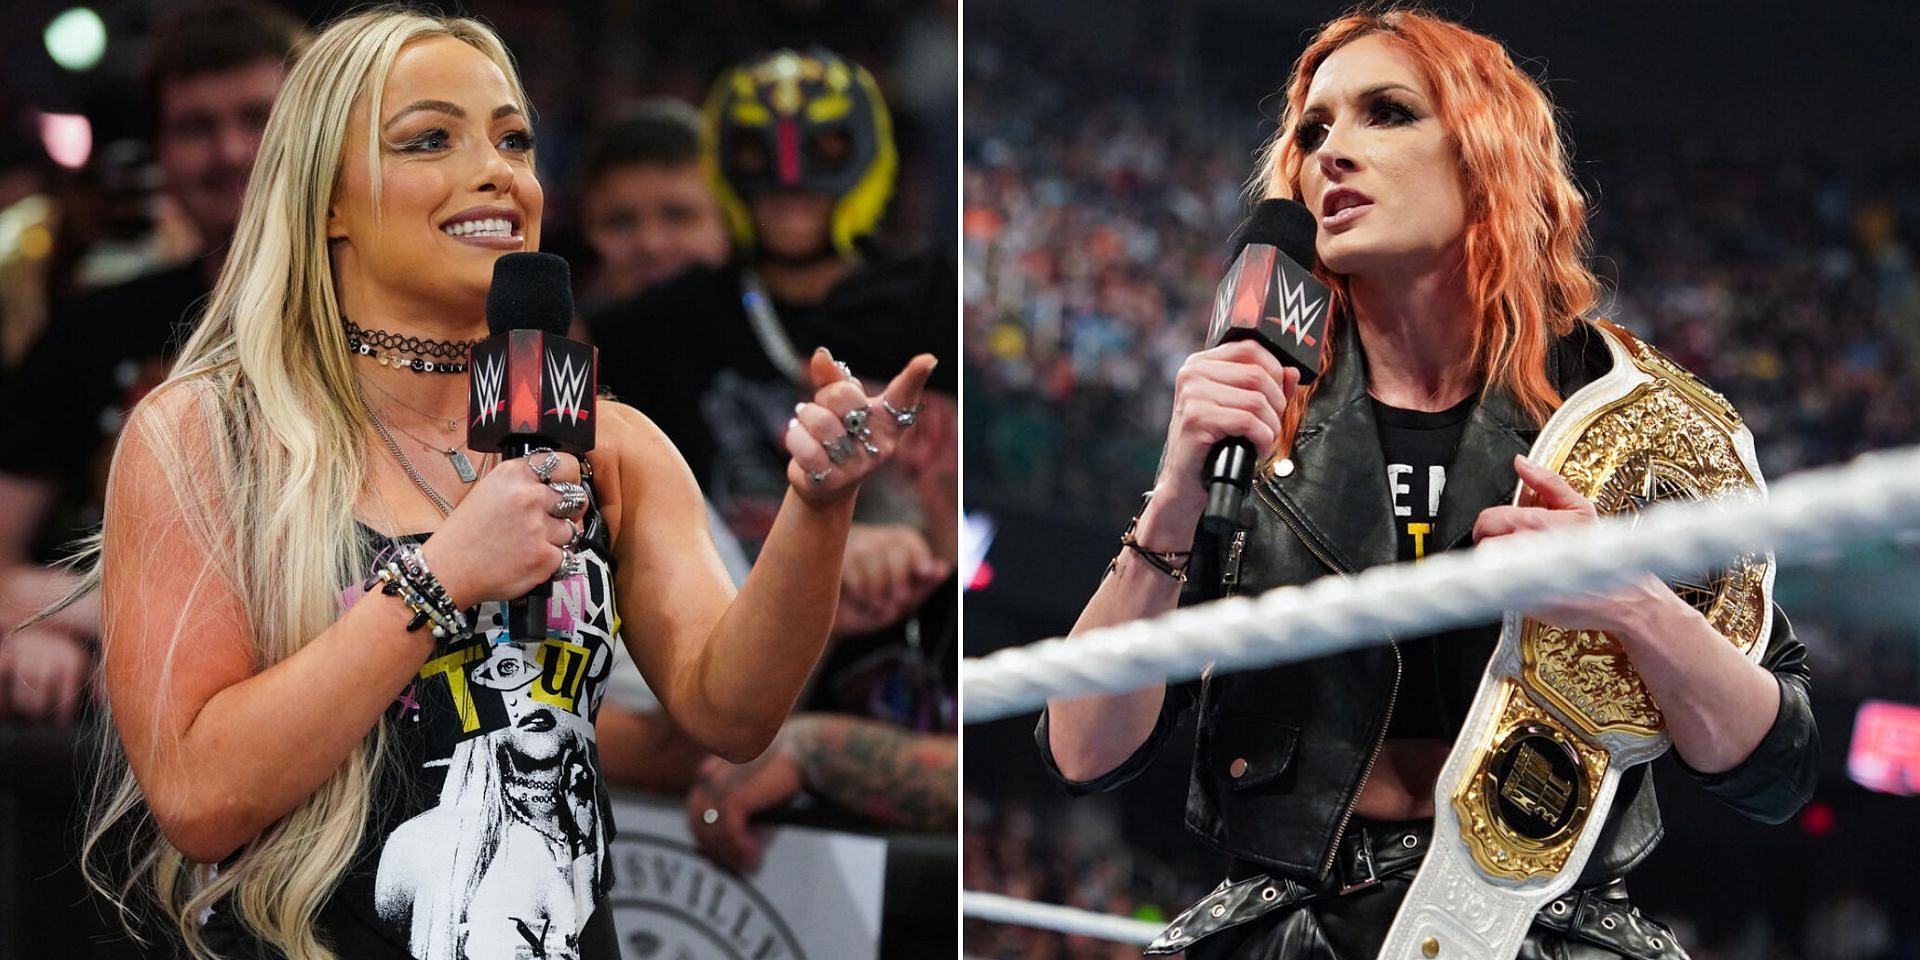 Becky Lynch was involved in a confrontation with Liv Morgan on RAW